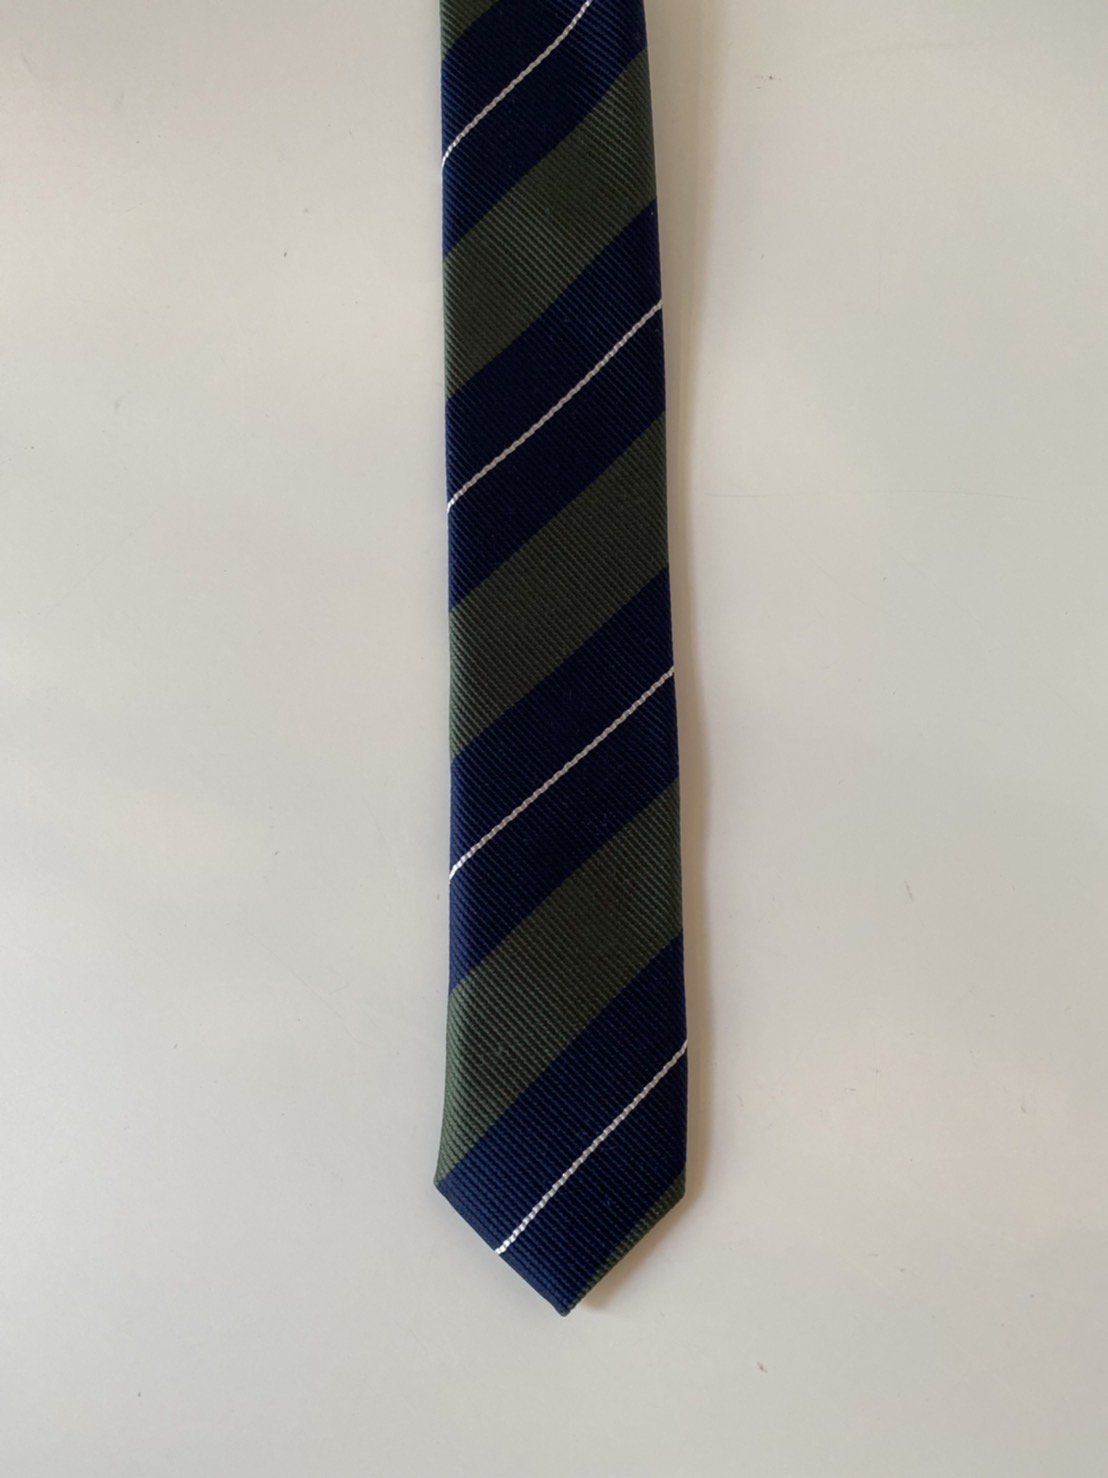 LITTLEBIG<br />Regimental Tie / Green<img class='new_mark_img2' src='https://img.shop-pro.jp/img/new/icons14.gif' style='border:none;display:inline;margin:0px;padding:0px;width:auto;' />